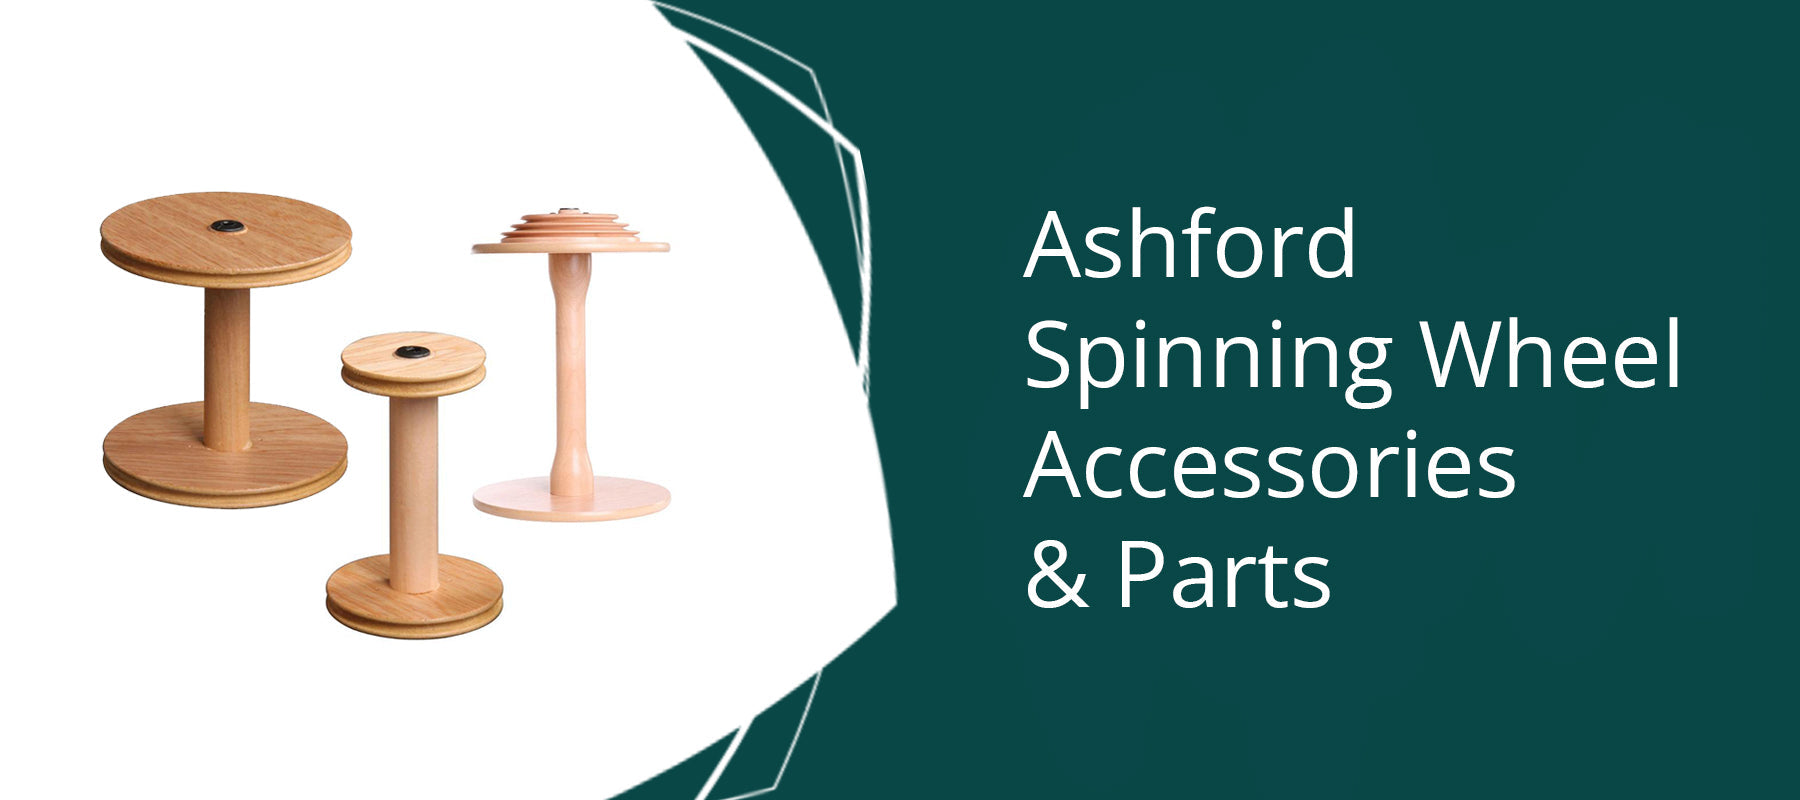 Ashford Spinning Wheel Accessories and Parts - Thread Collective Australia